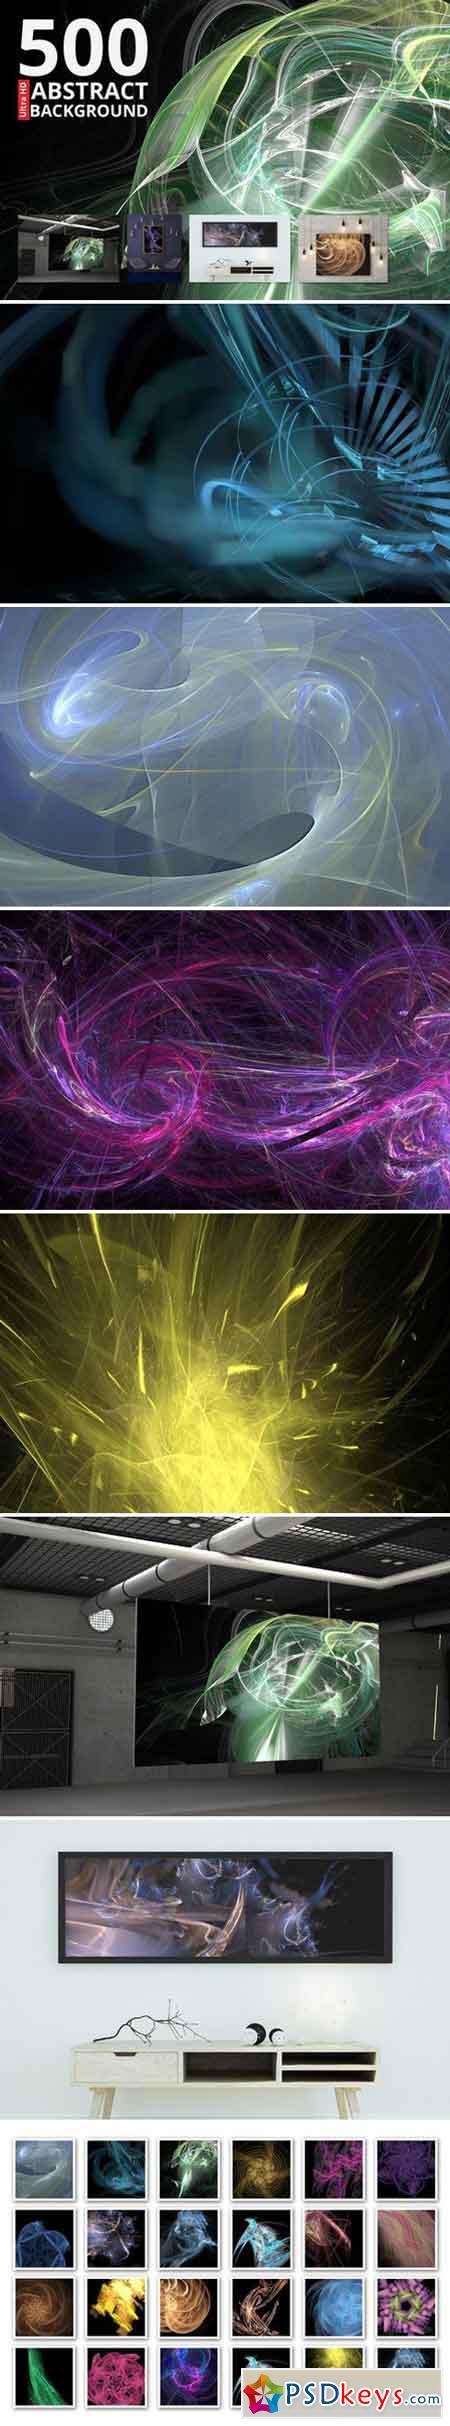 500 abstract backgrounds 38306